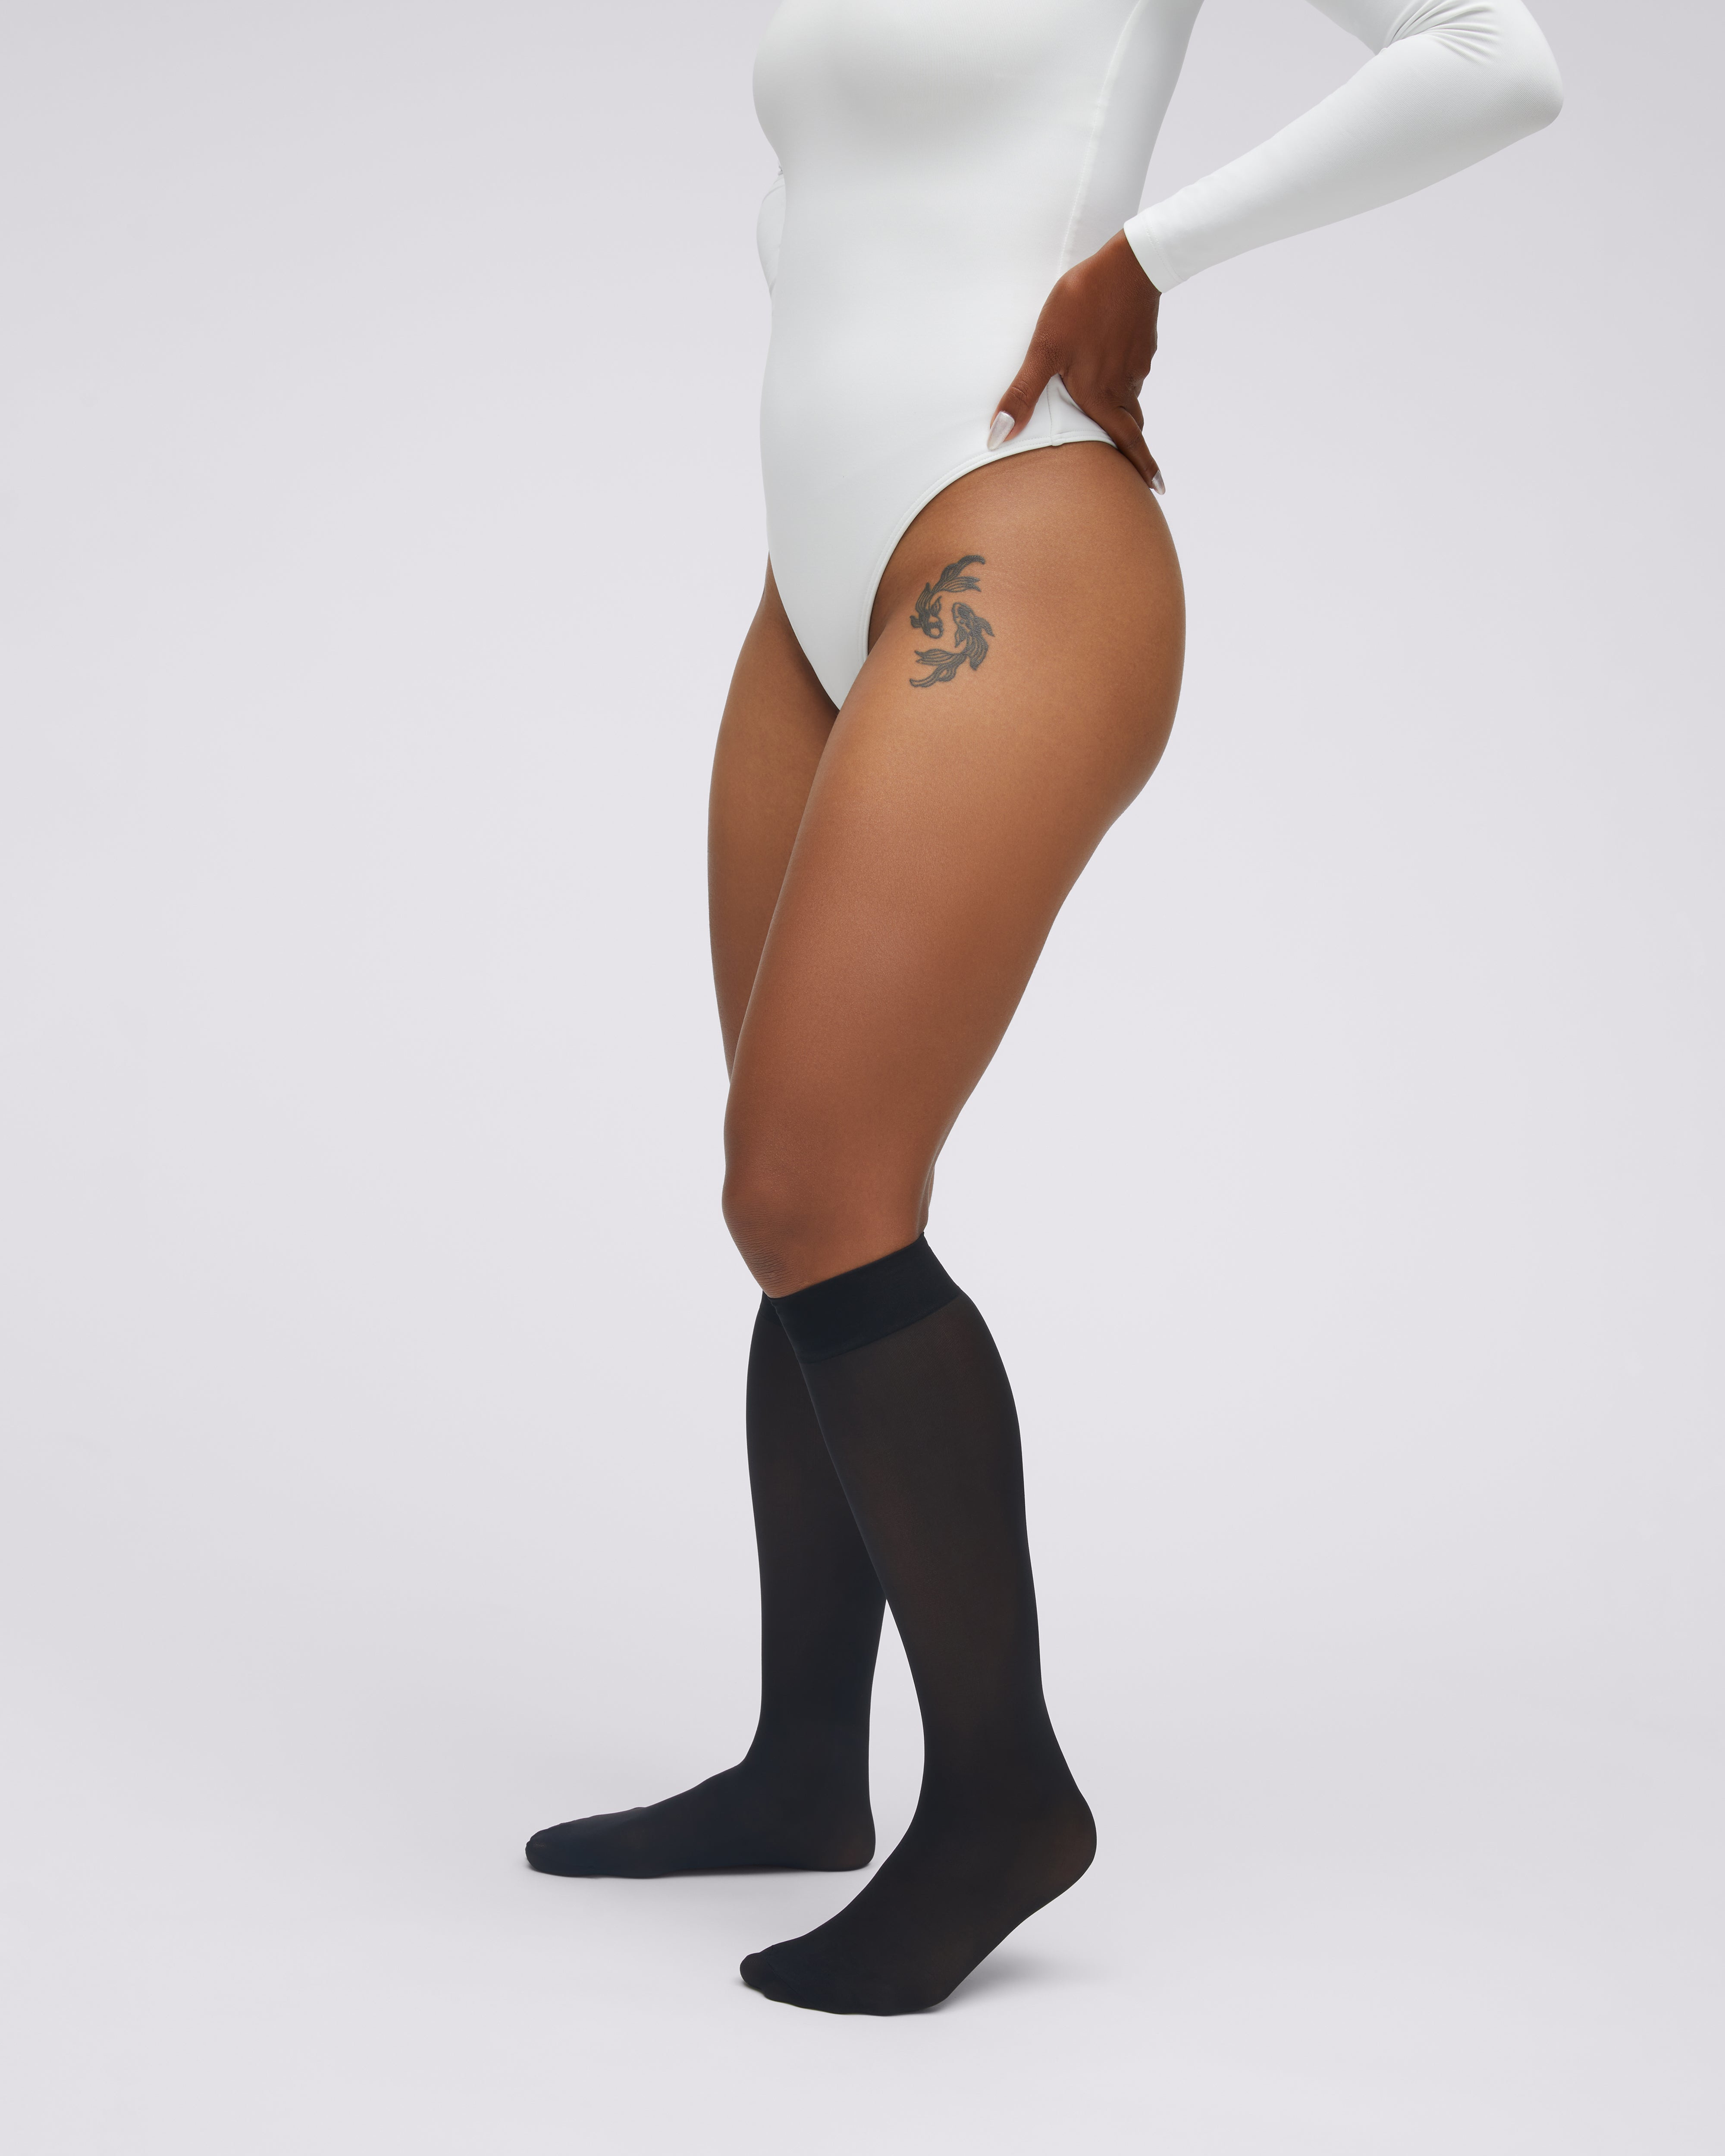 The makers of Sheertex rip-resist tights, launch Watertex the first  swimsuit that towel wipes dry